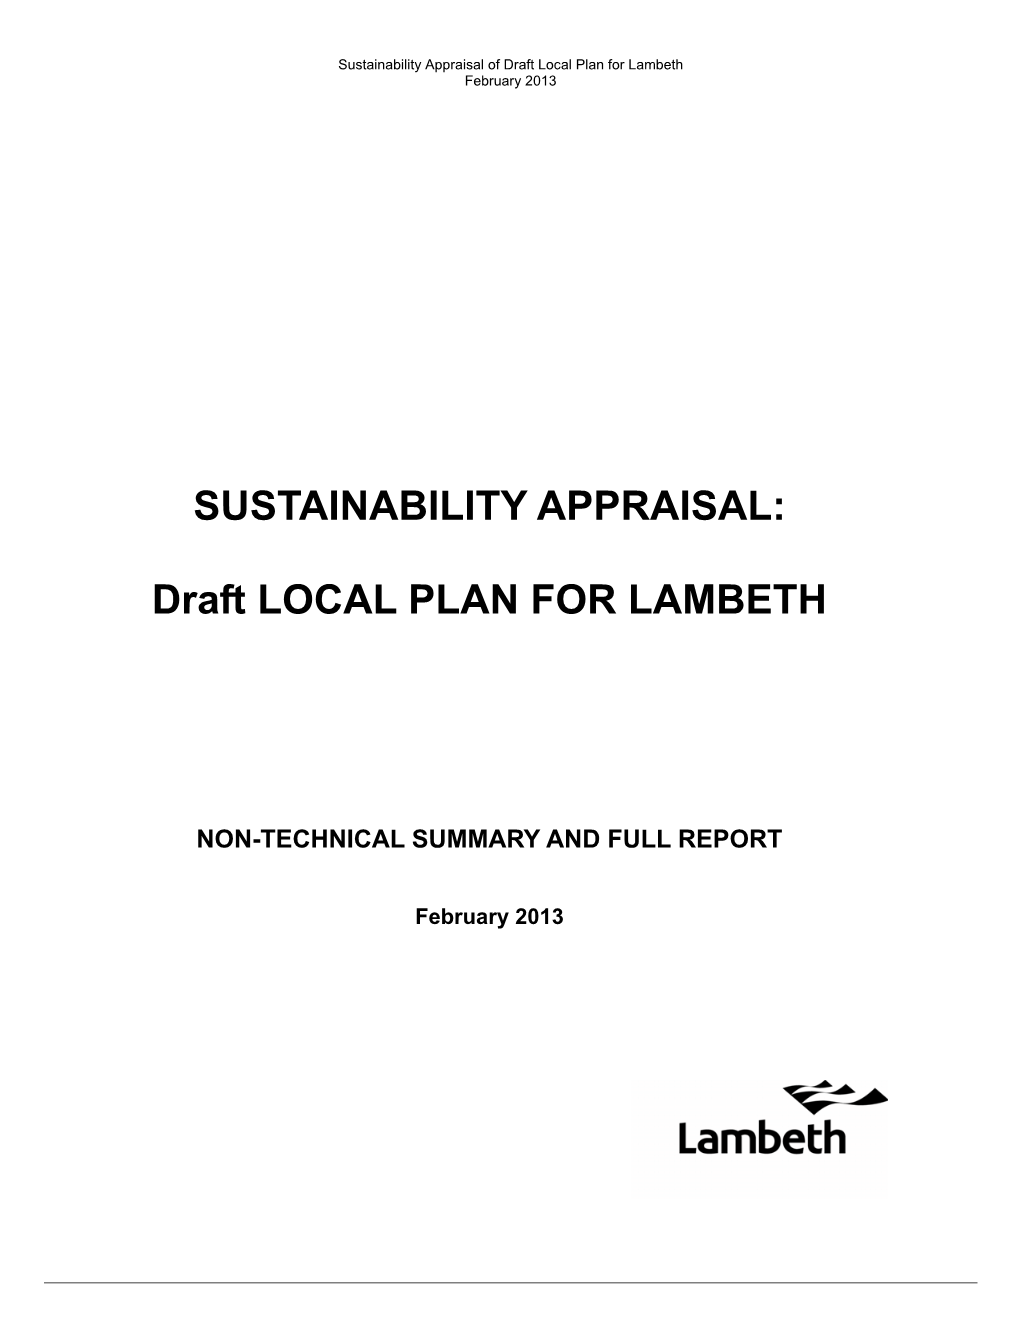 Sustainability Appraisal of Draft Local Plan for Lambeth February 2013